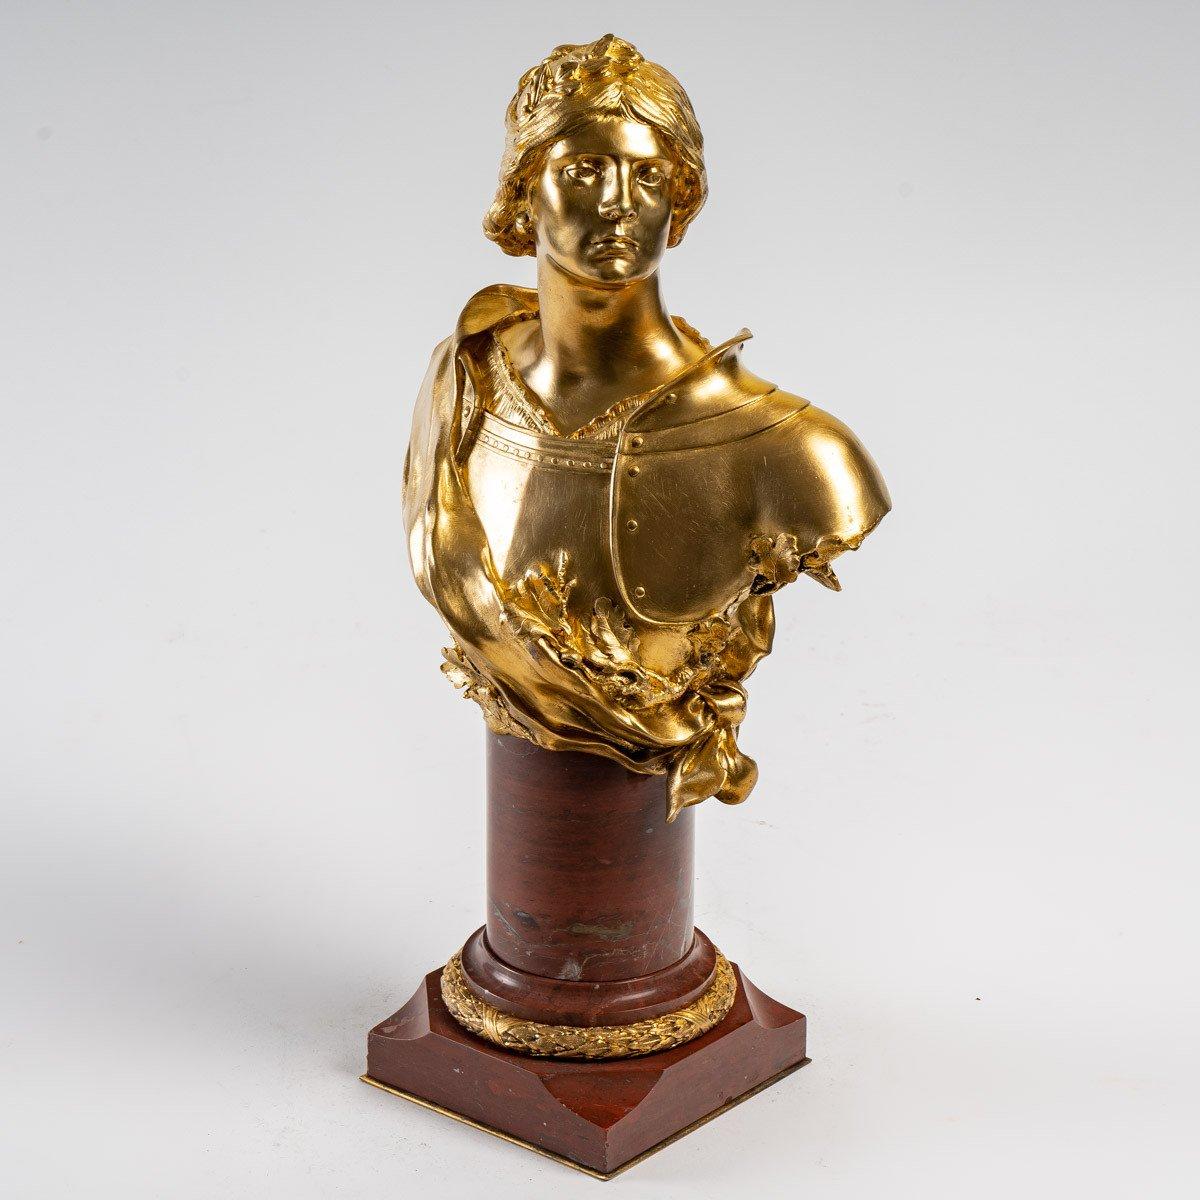 Gilt Sculpture of Joan of Arc by François Sicard in gilded bronze